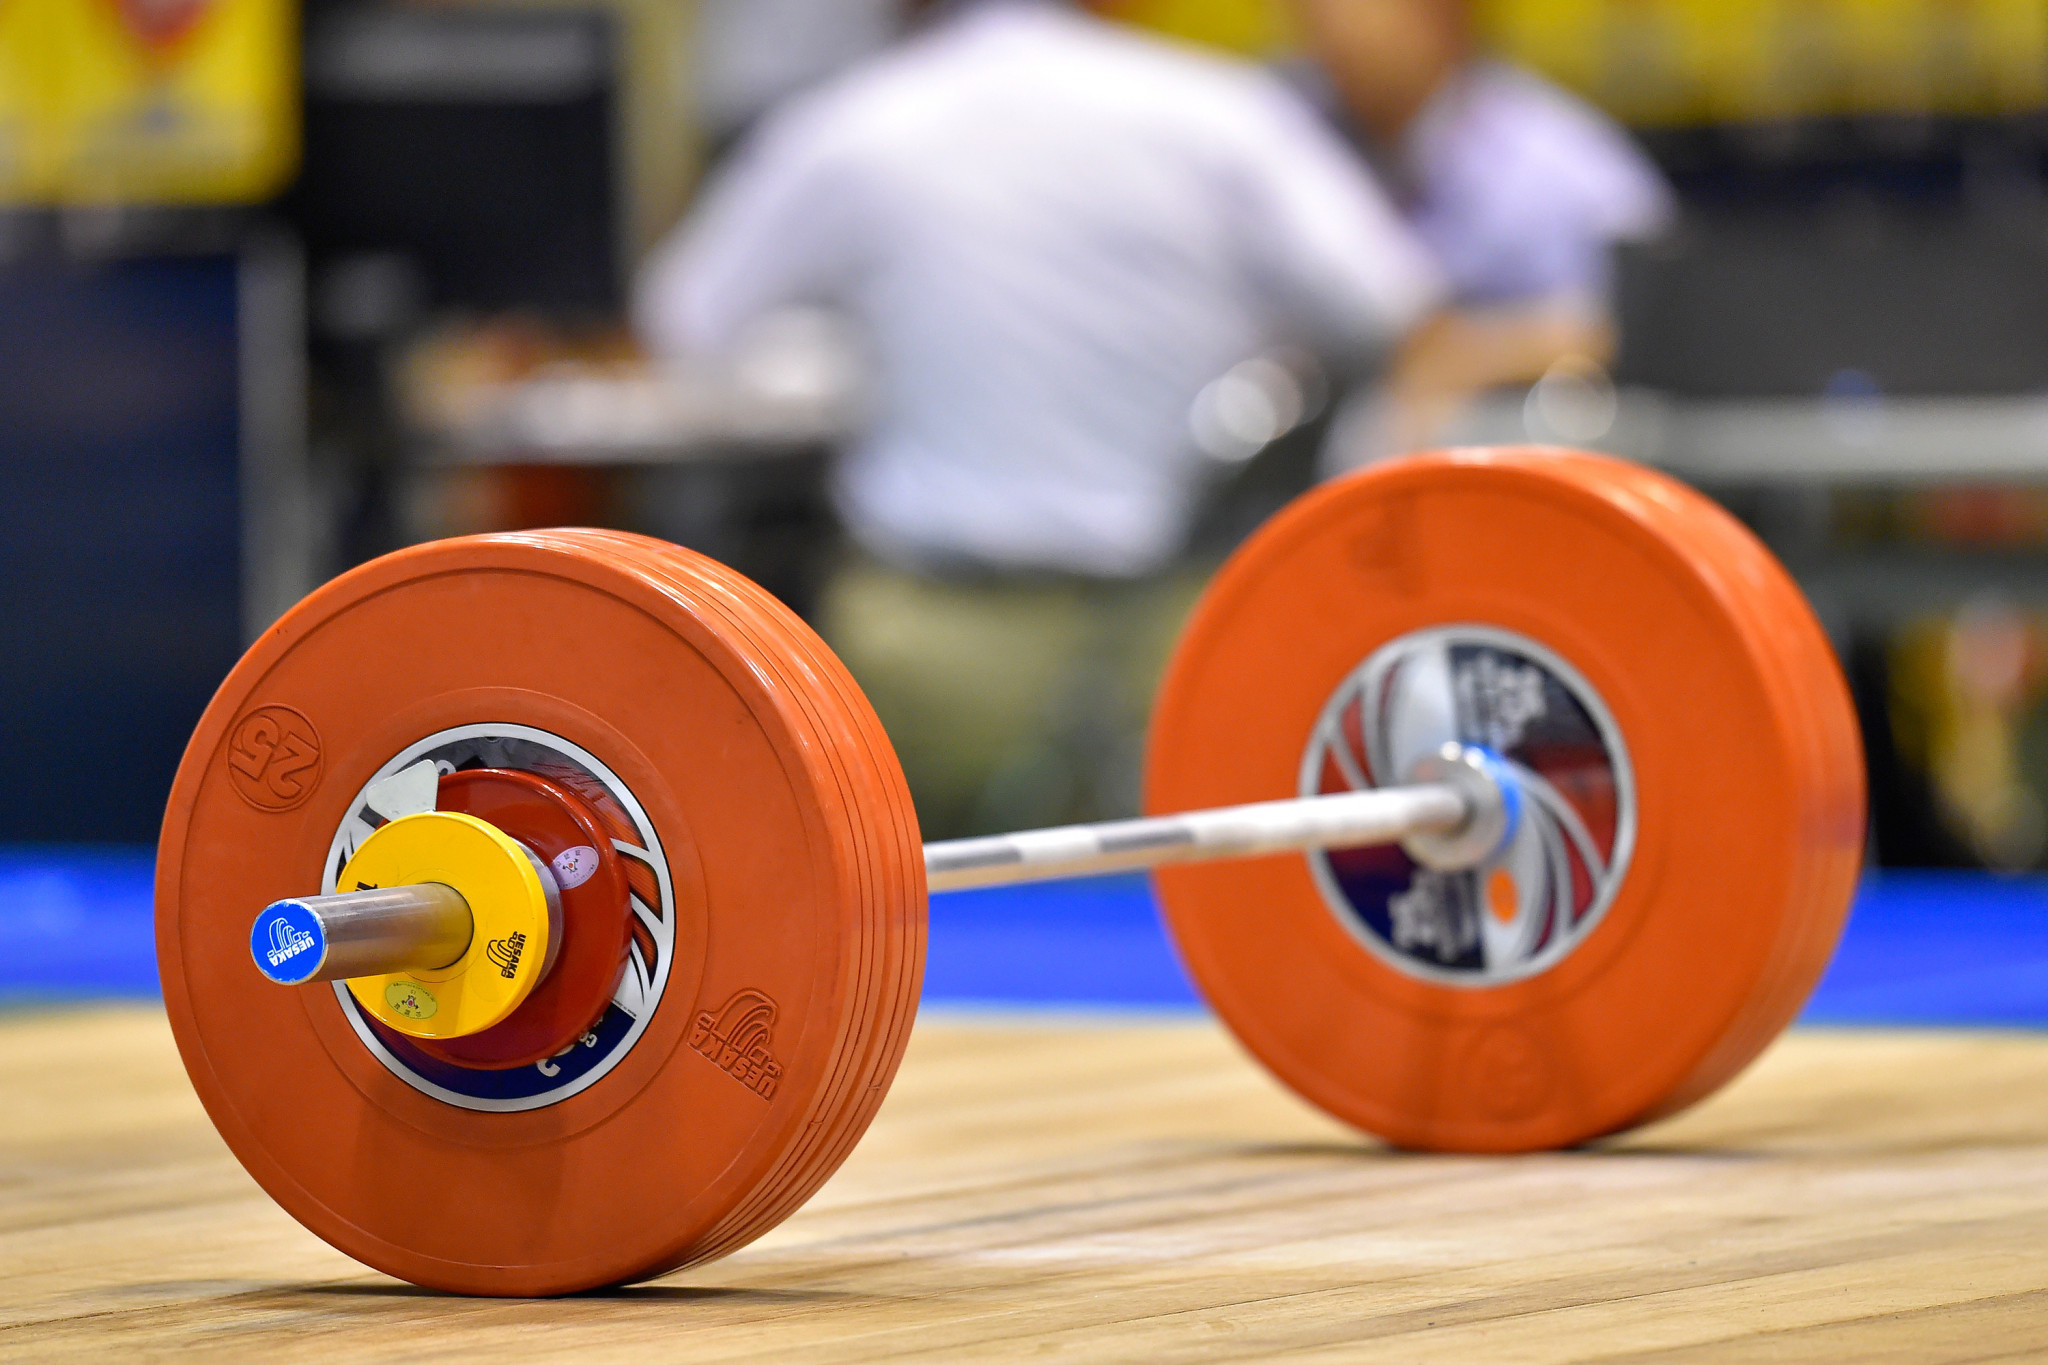 Kazakhstan topped the IWF Youth World Championships medals table ahead of Colombia ©Getty Images